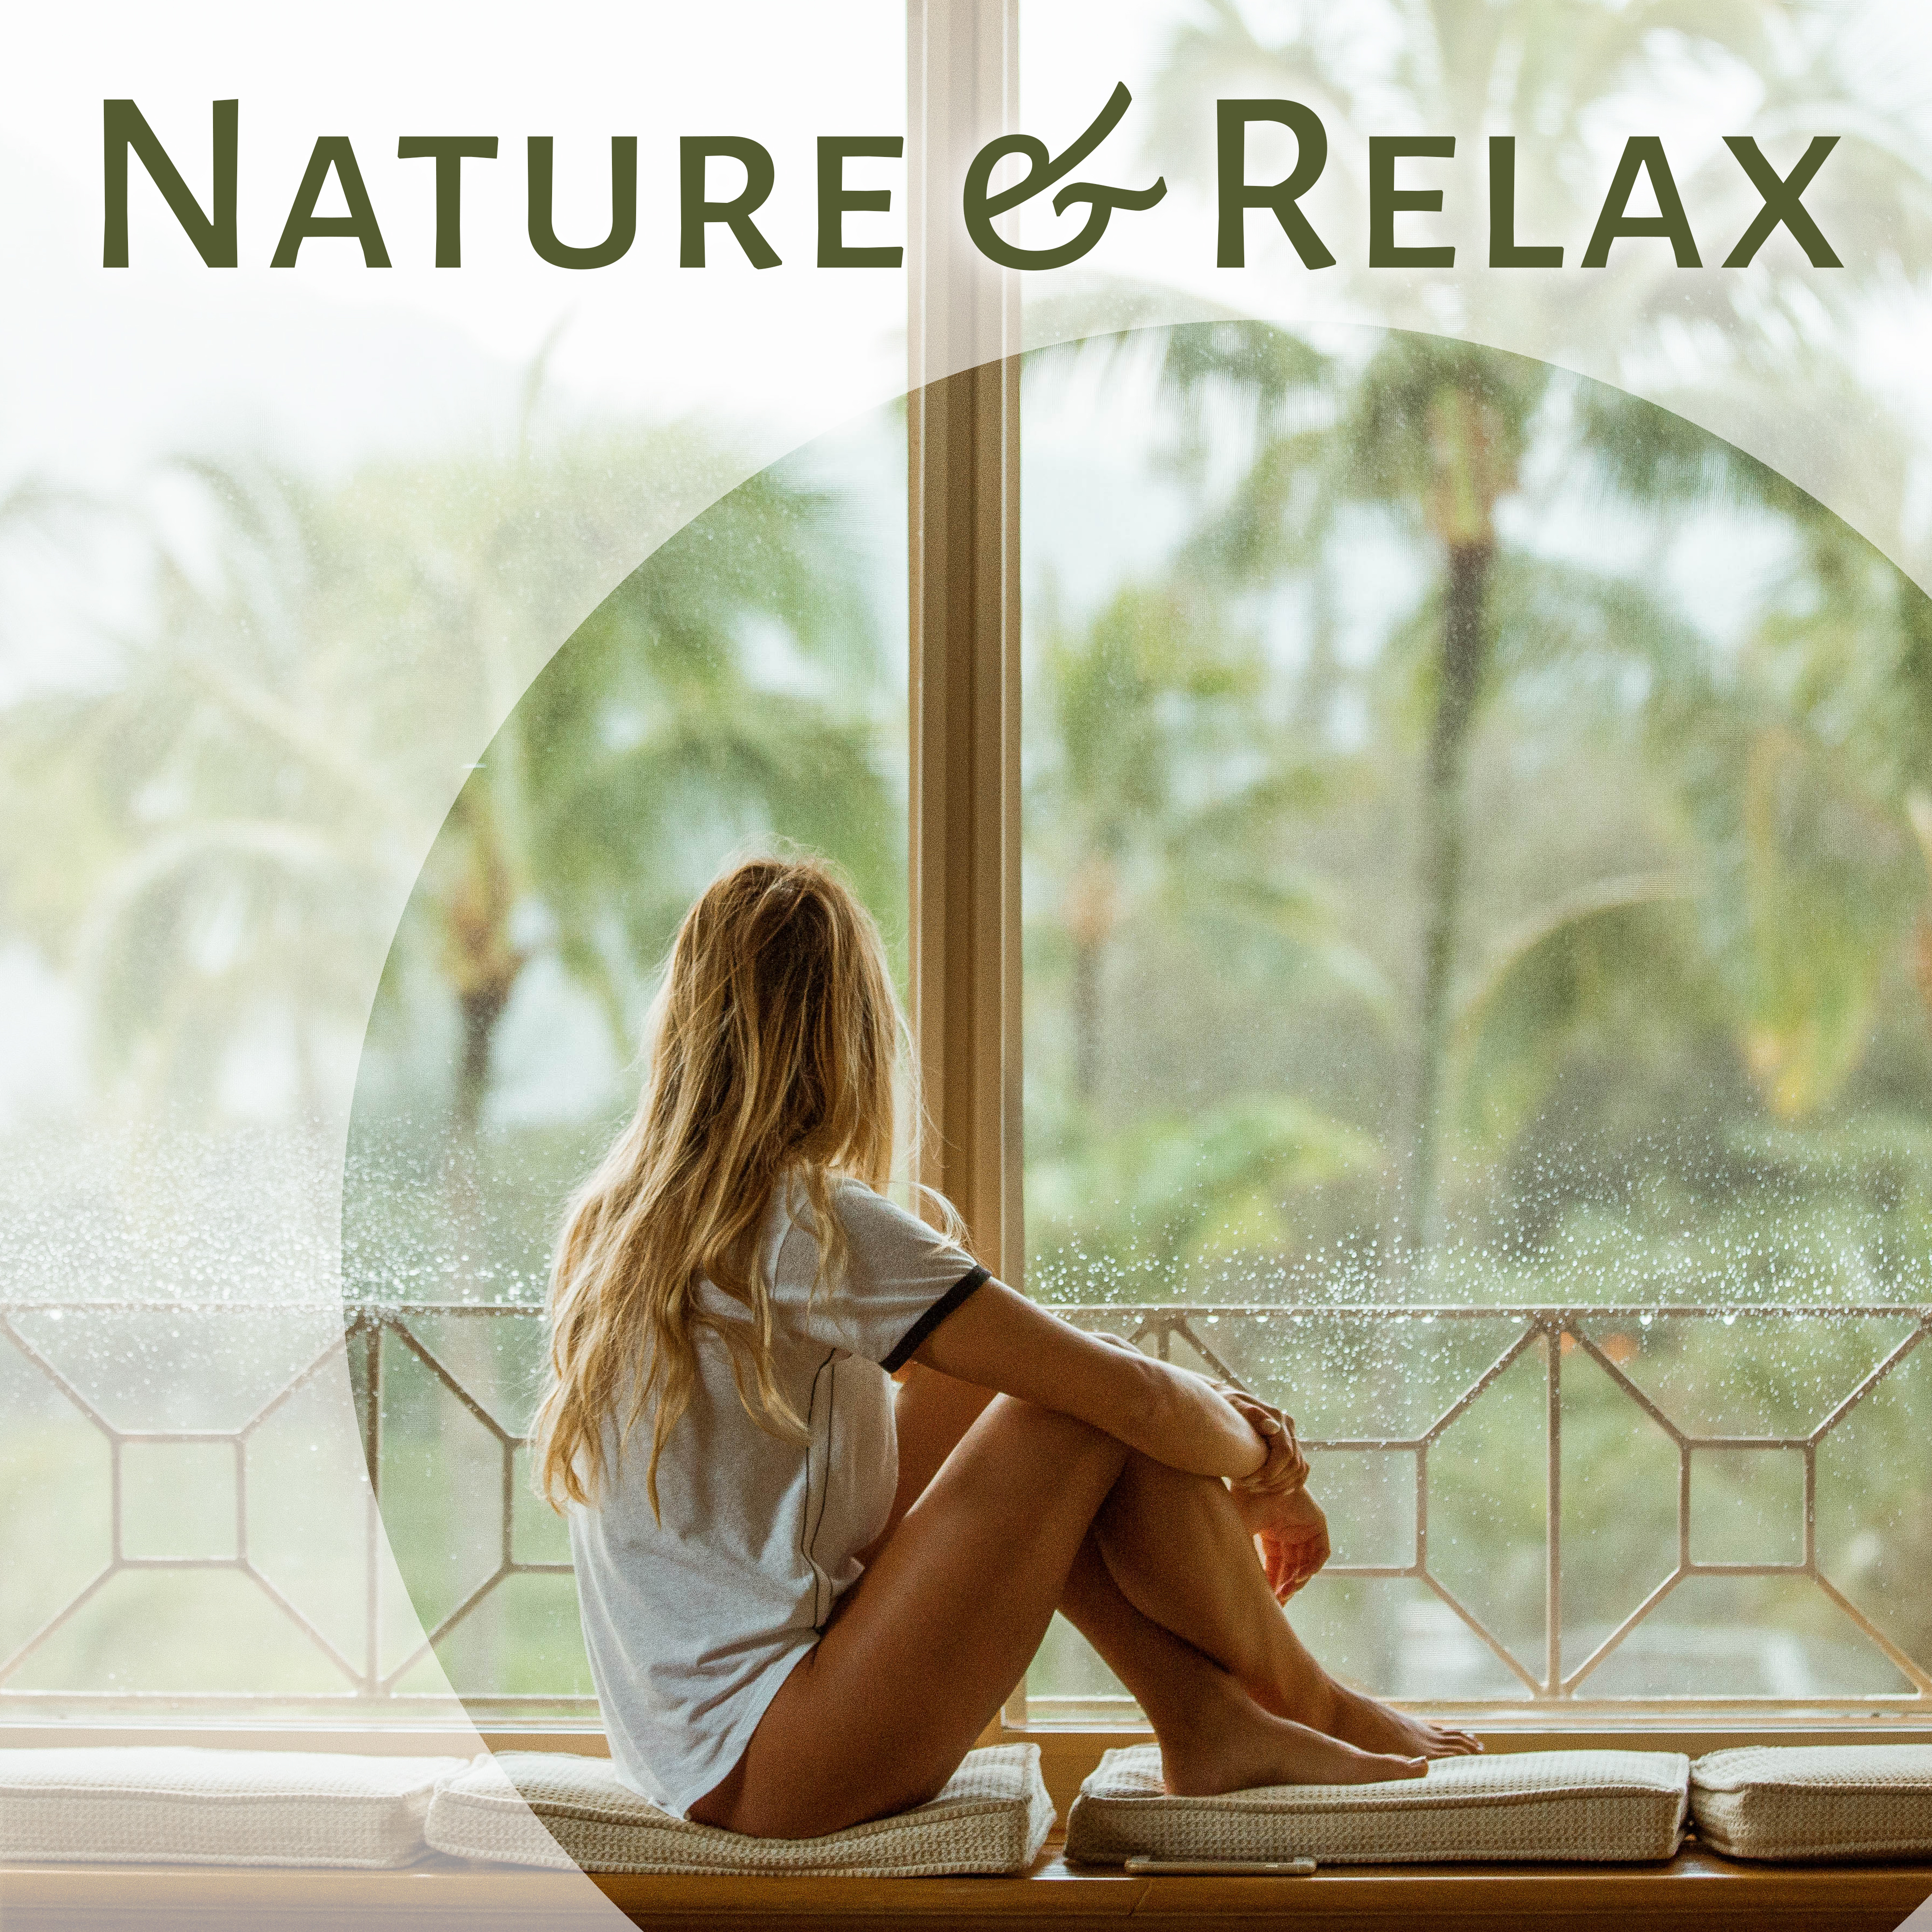 Nature & Relax – Soft Music for Relaxation, Healing Songs, Calm Down, Perfect Rest, Anti Stress Music, Zen, Harmony, Therapy for Mind